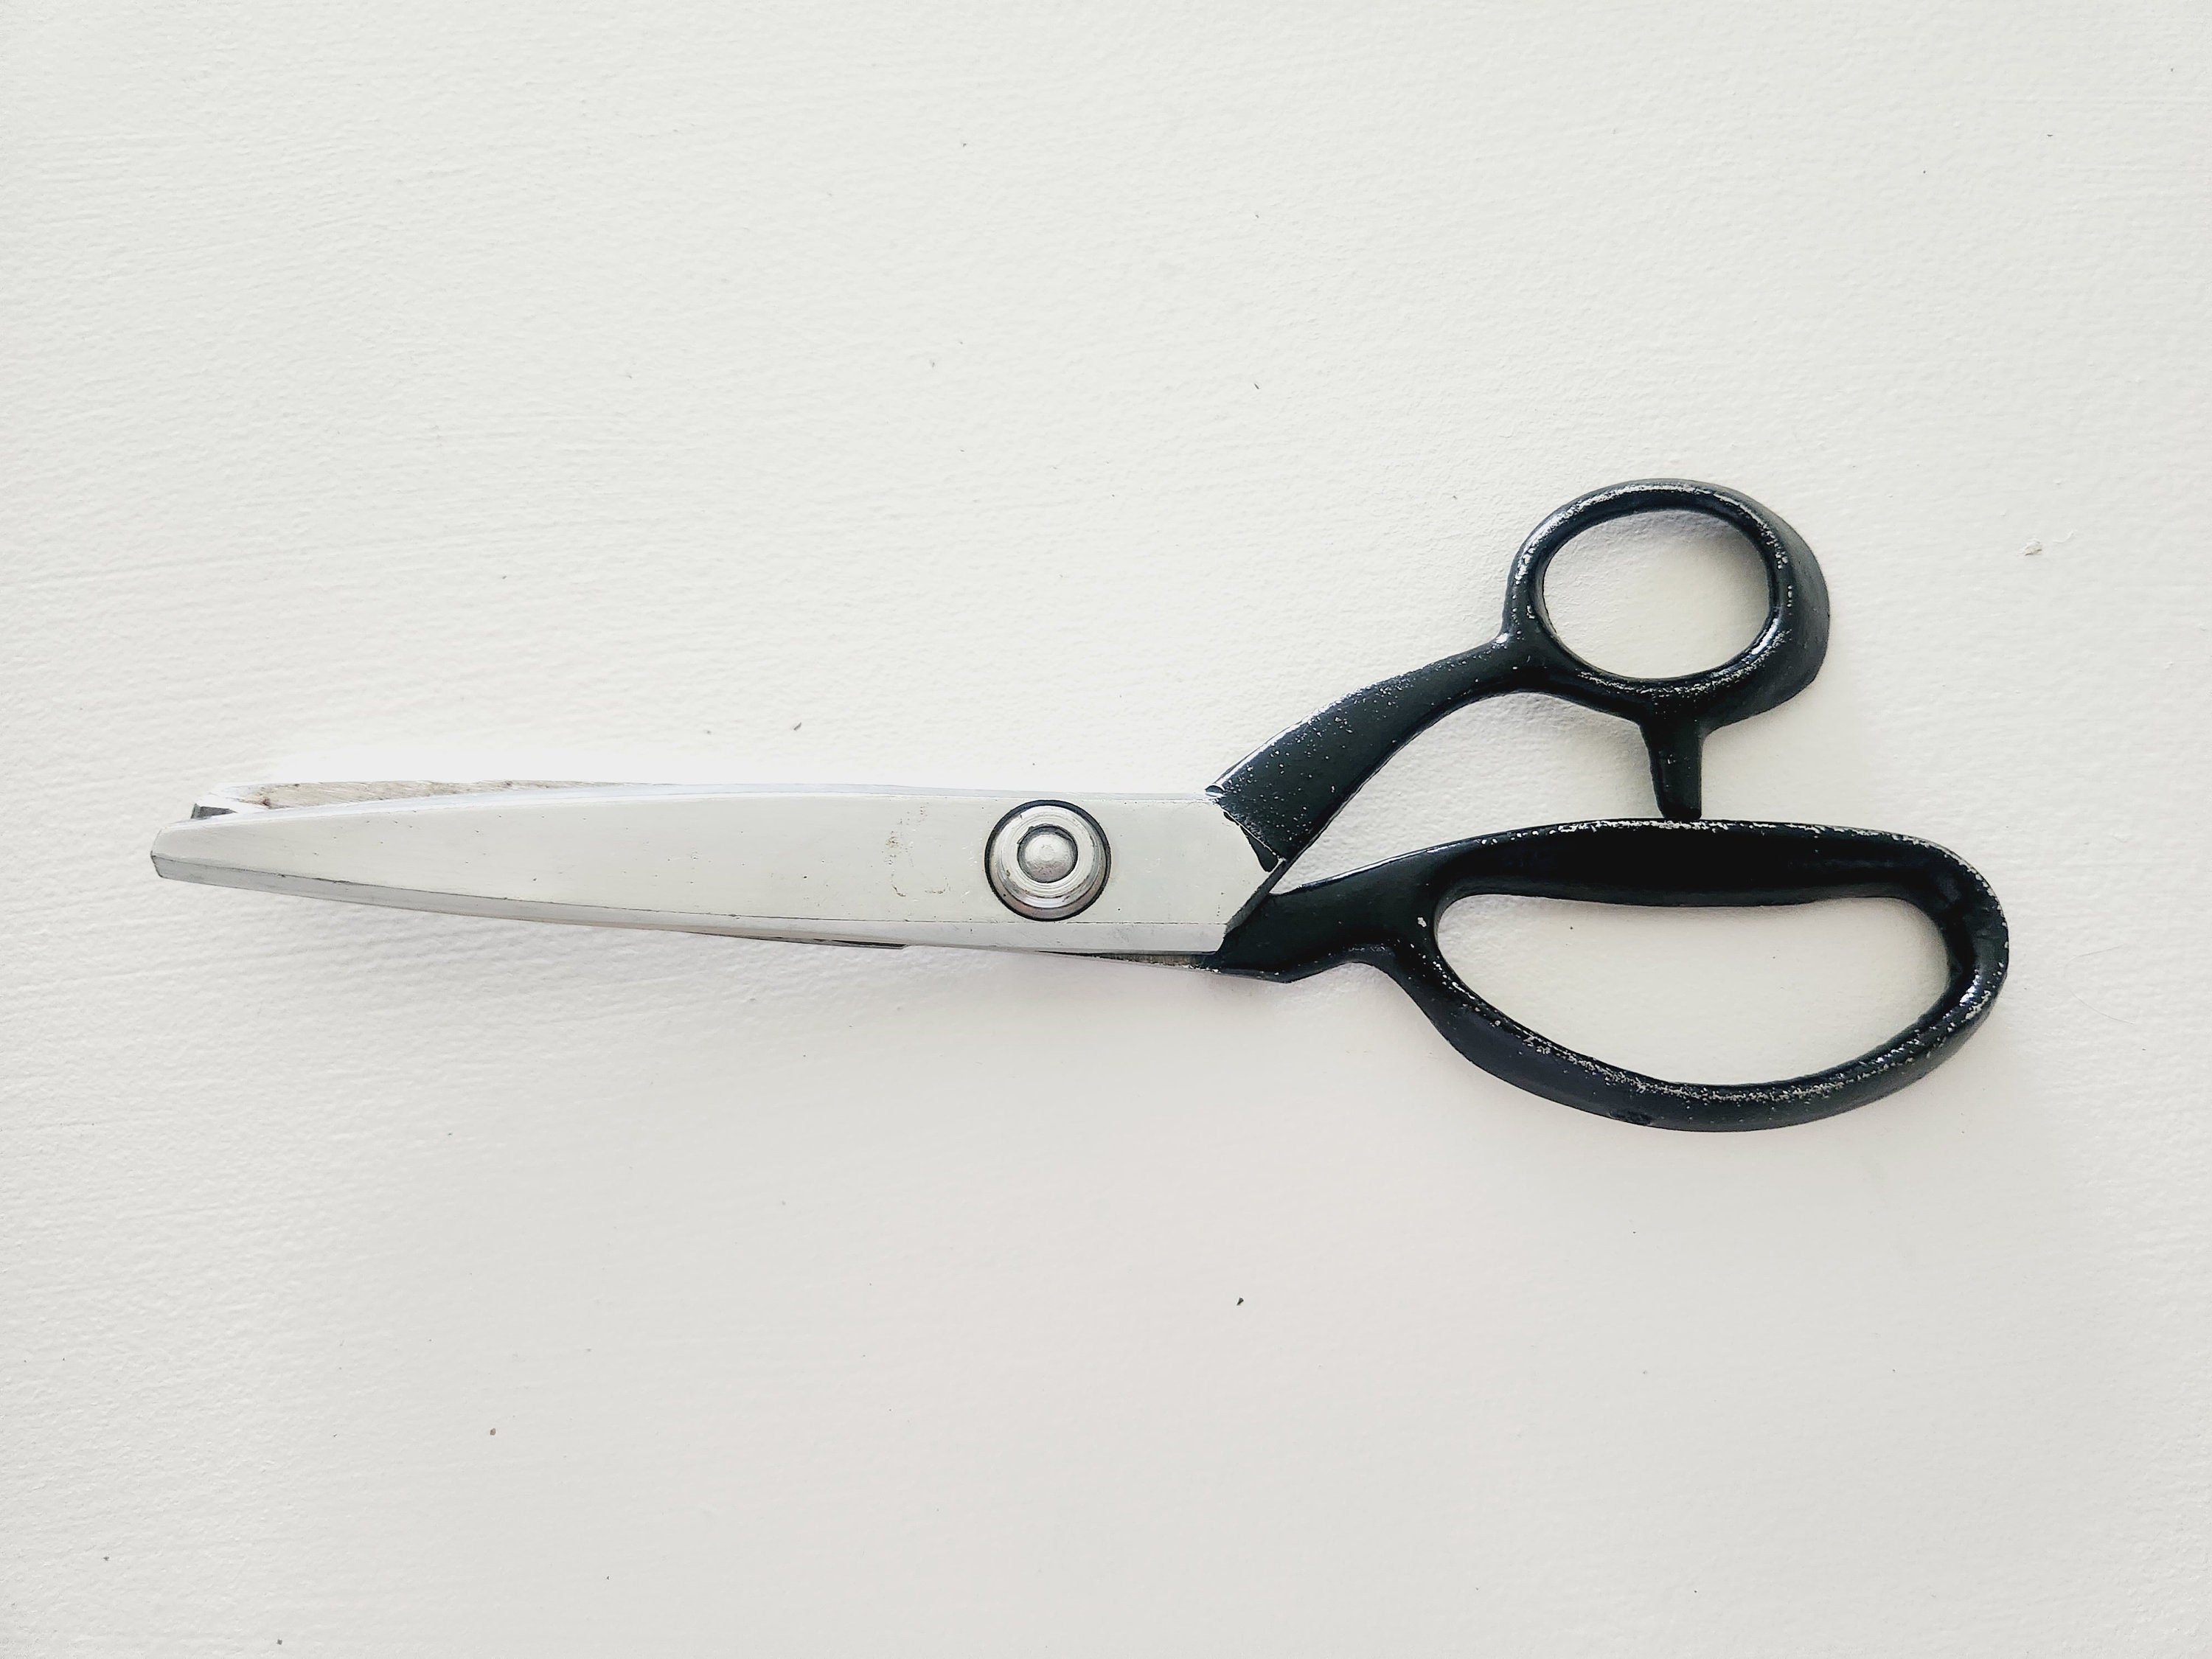 CANARY Powerful Heavy Duty Industrial Scissors For Crafting